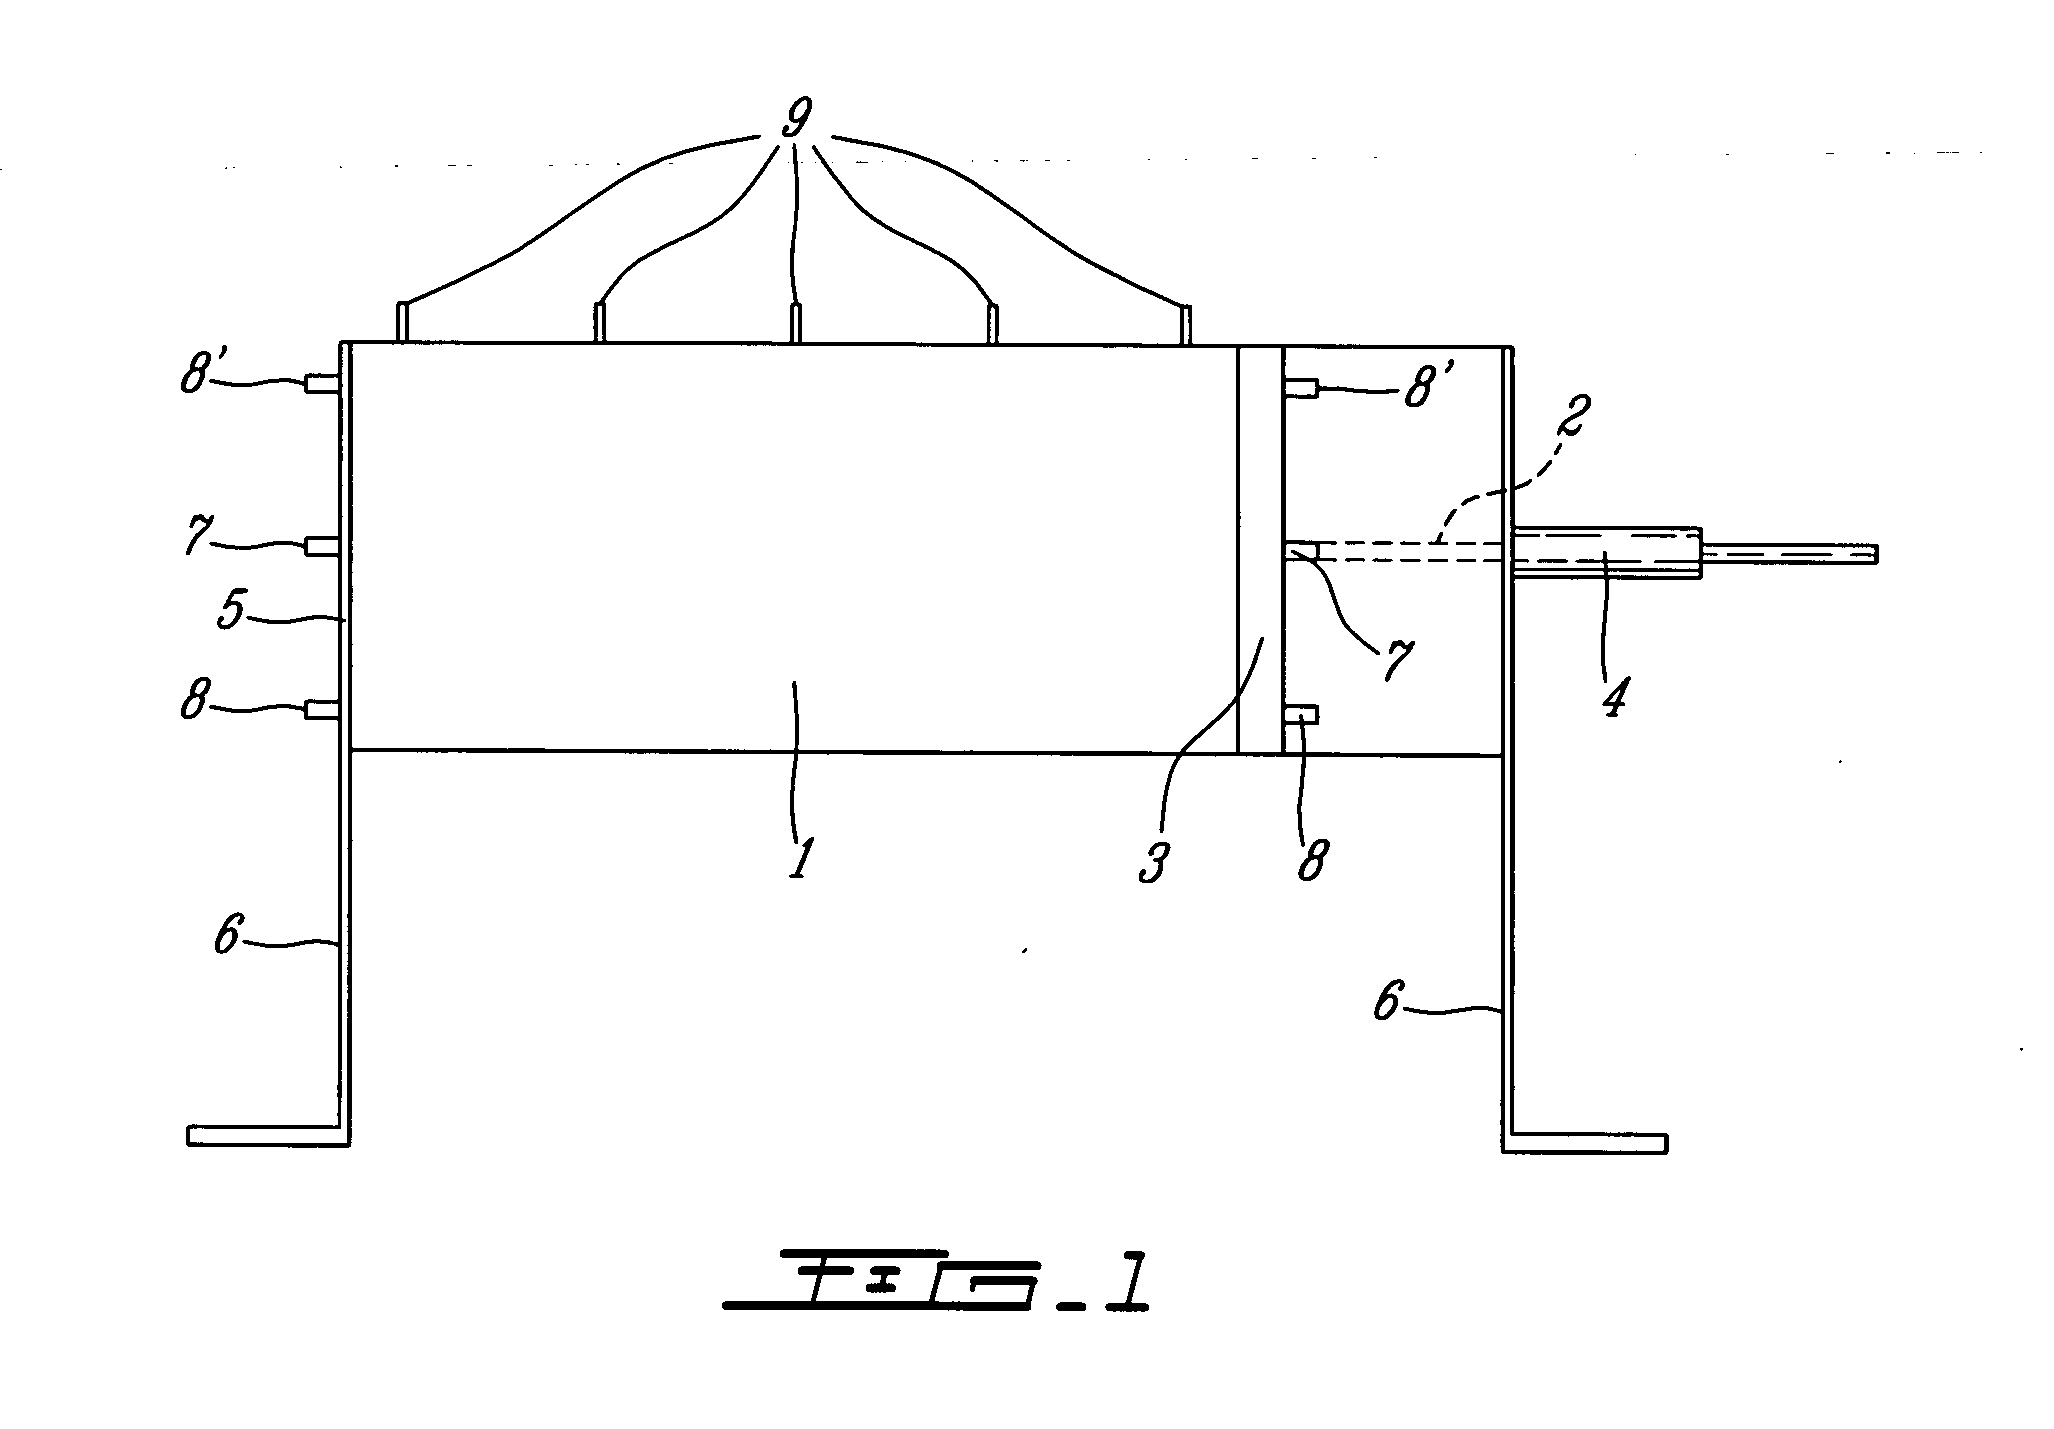 Process and apparatus for treating sludge by the combined action of electro-osmosis and pressure